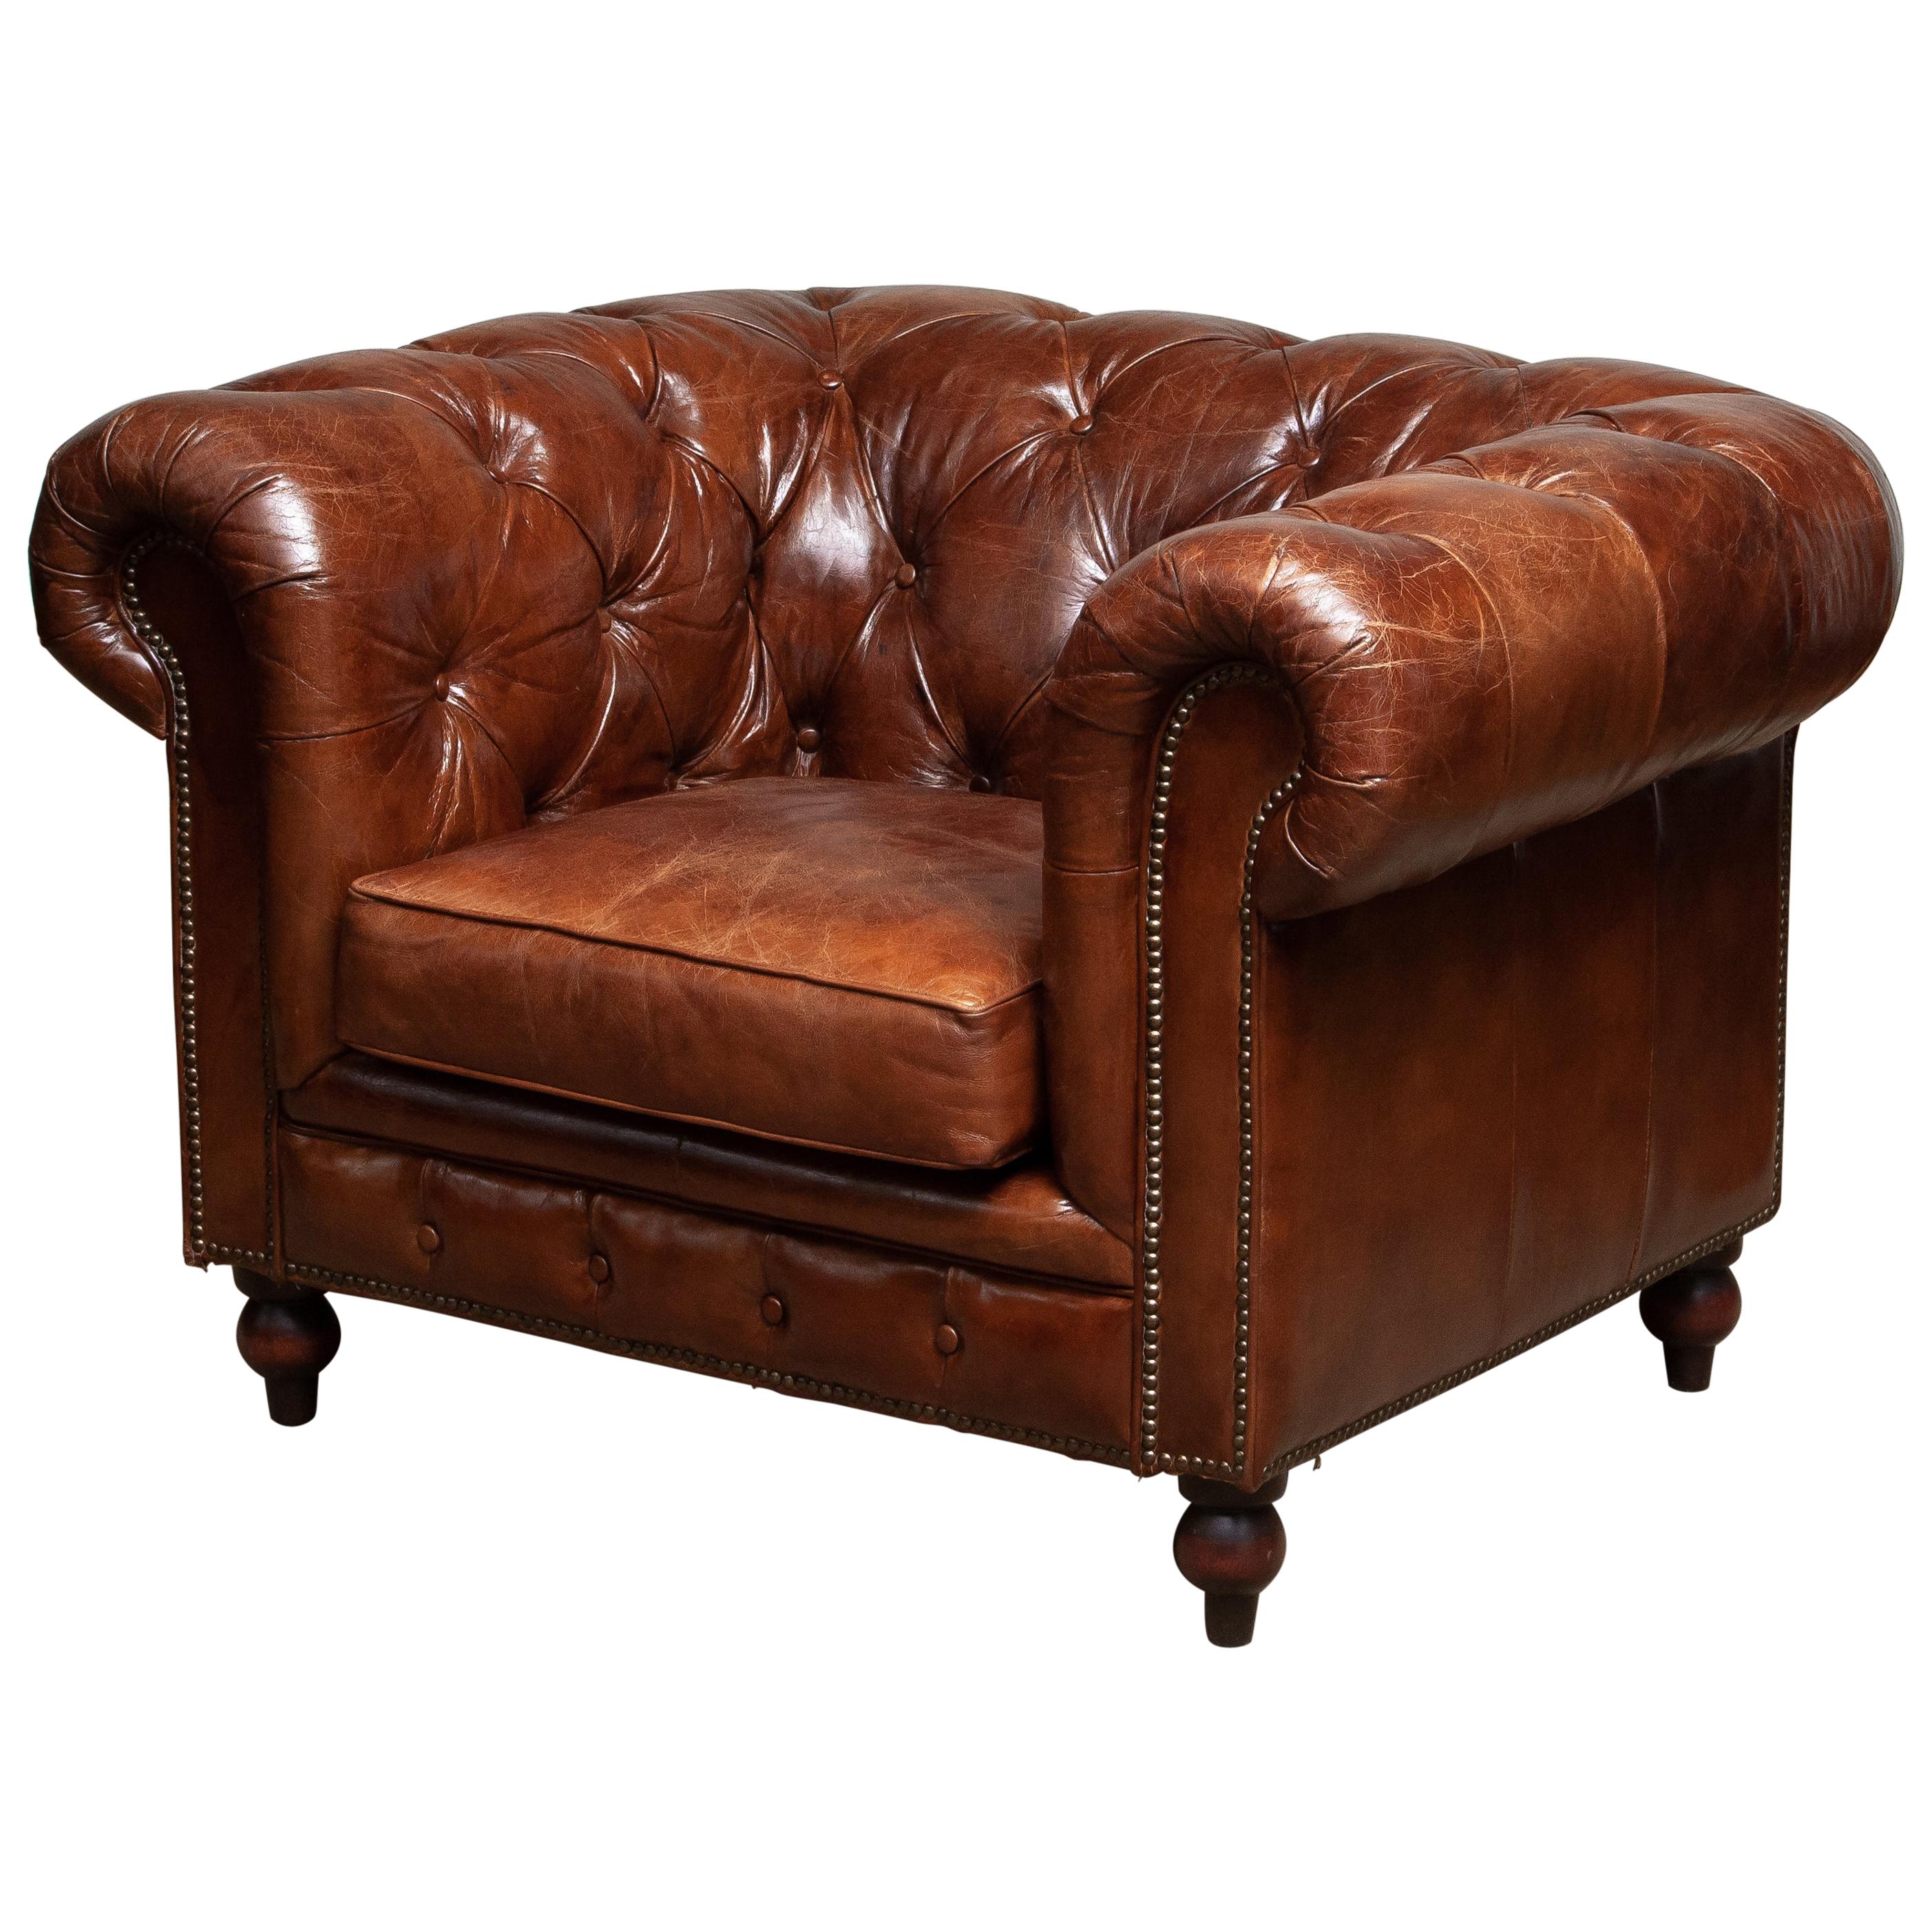 Tufted Brown Leather English Chesterfield Lounge Easy Chair, 20th Century